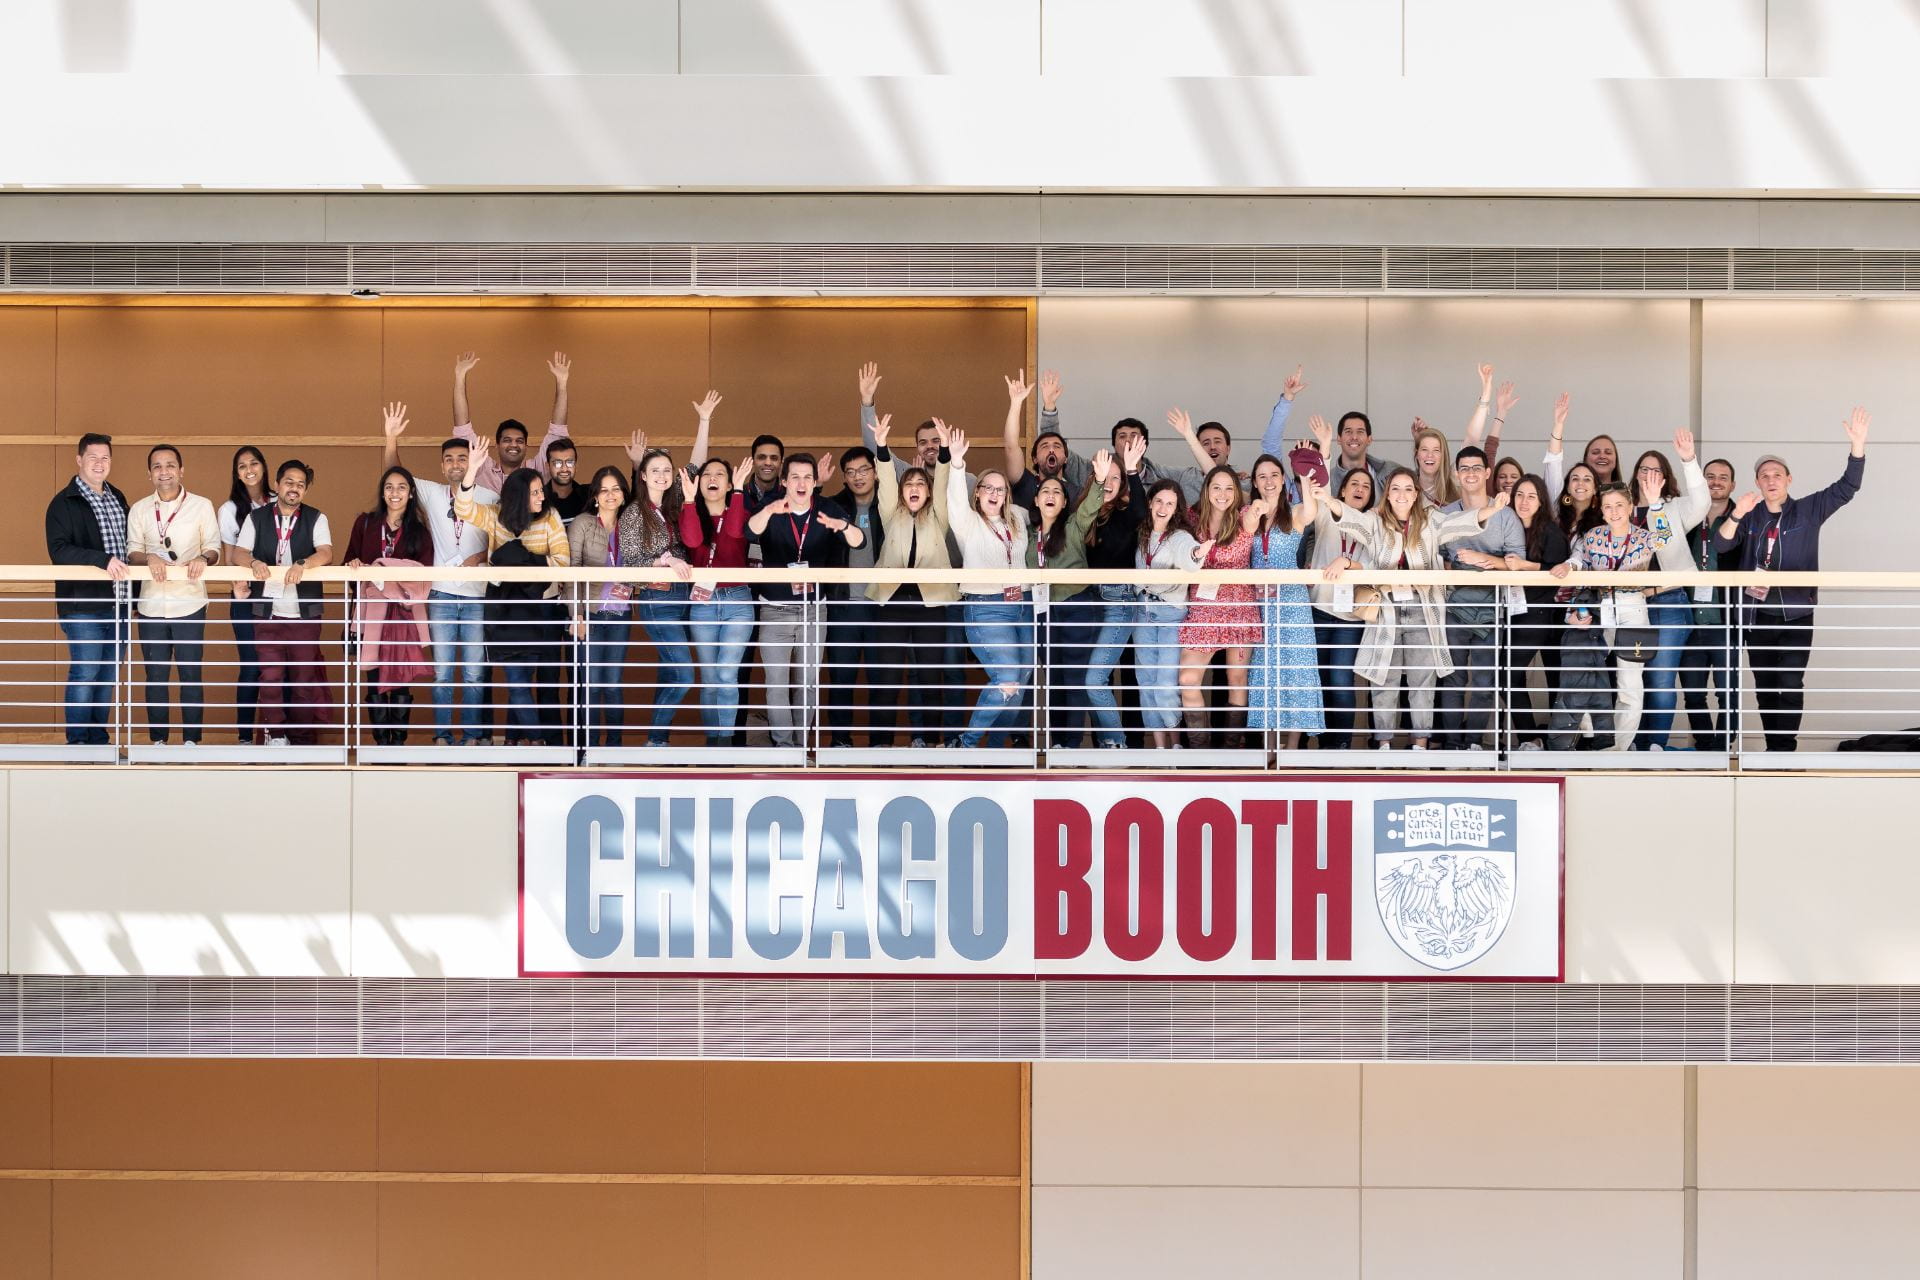 Group of people smiling and waving on an interior building balcony above a Chicago Booth sign